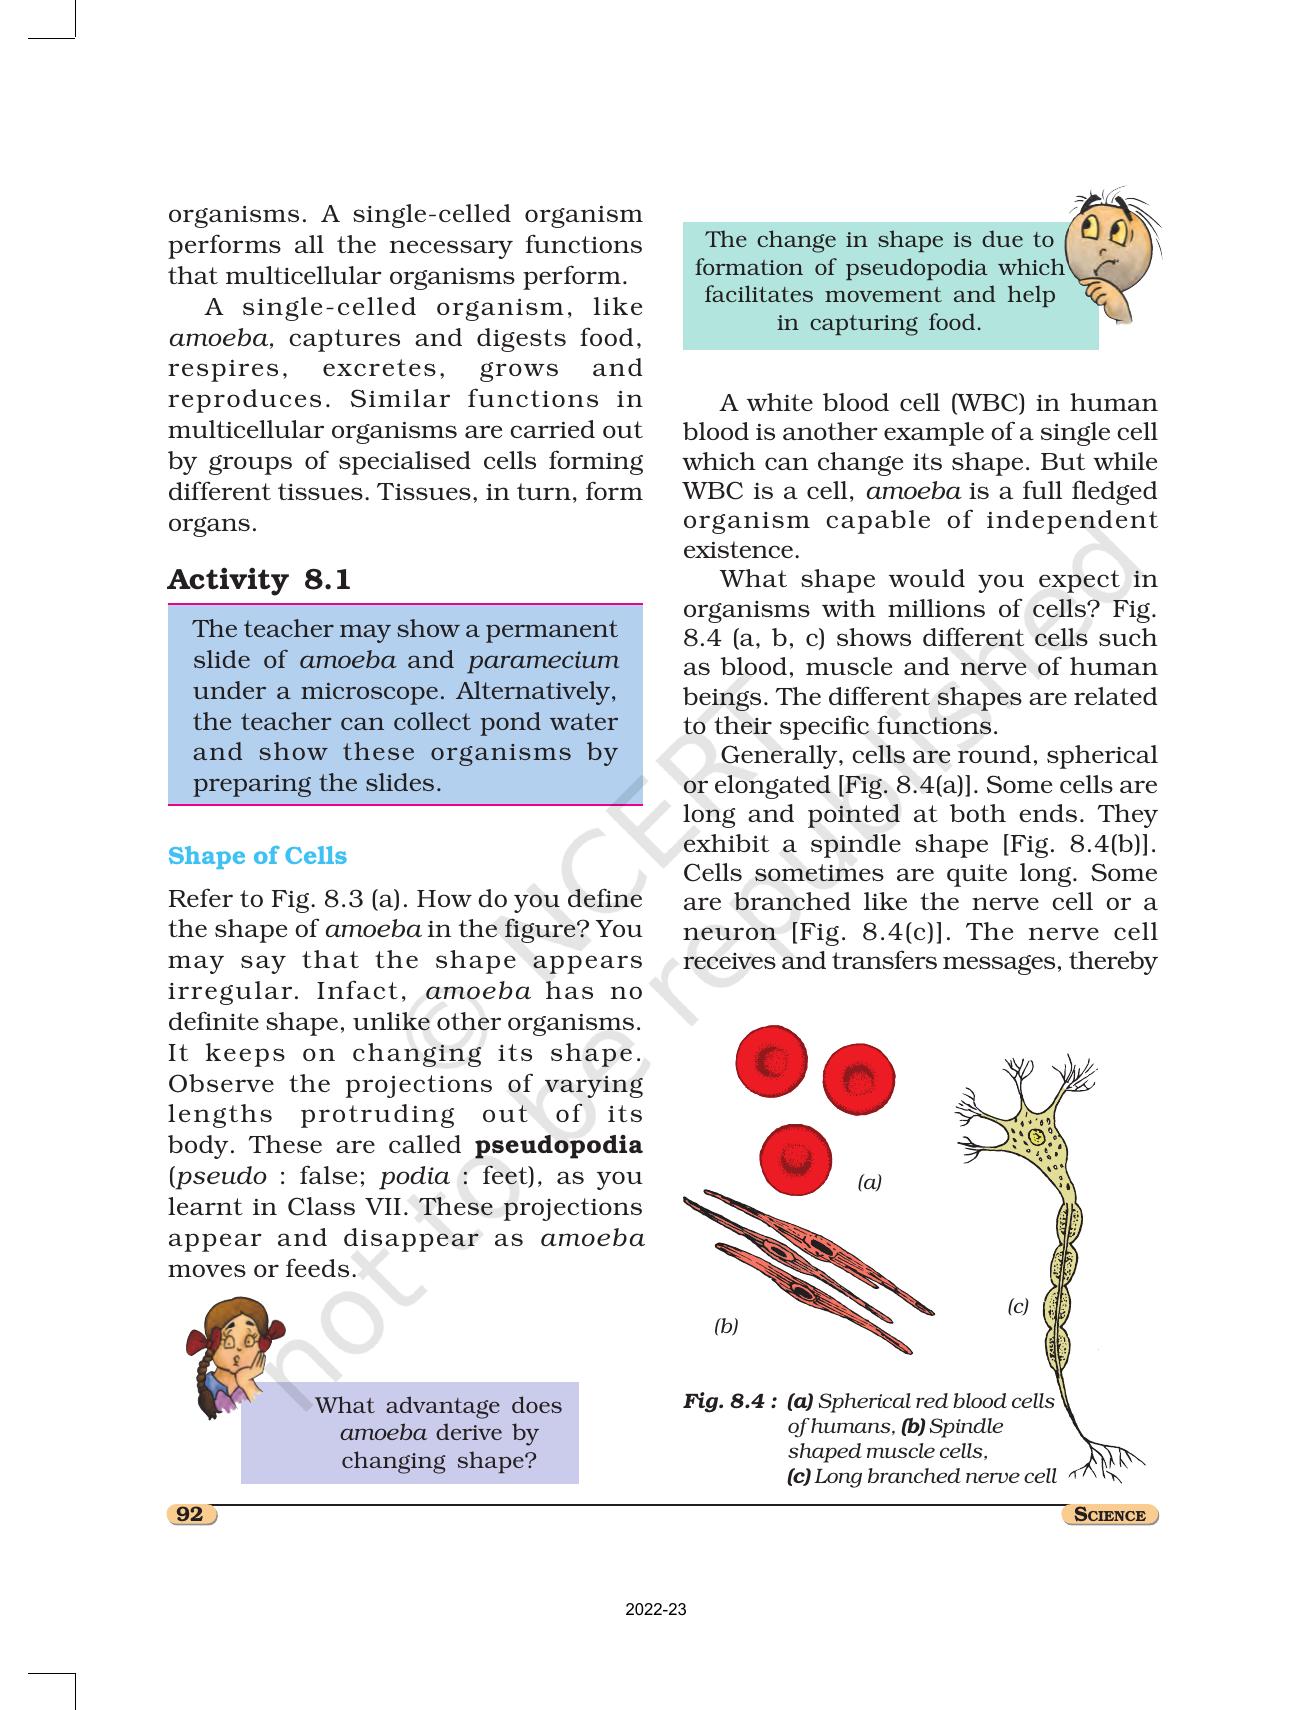 NCERT Book for Class 8 Science Chapter 8 Cell Structure and Functions - Page 3